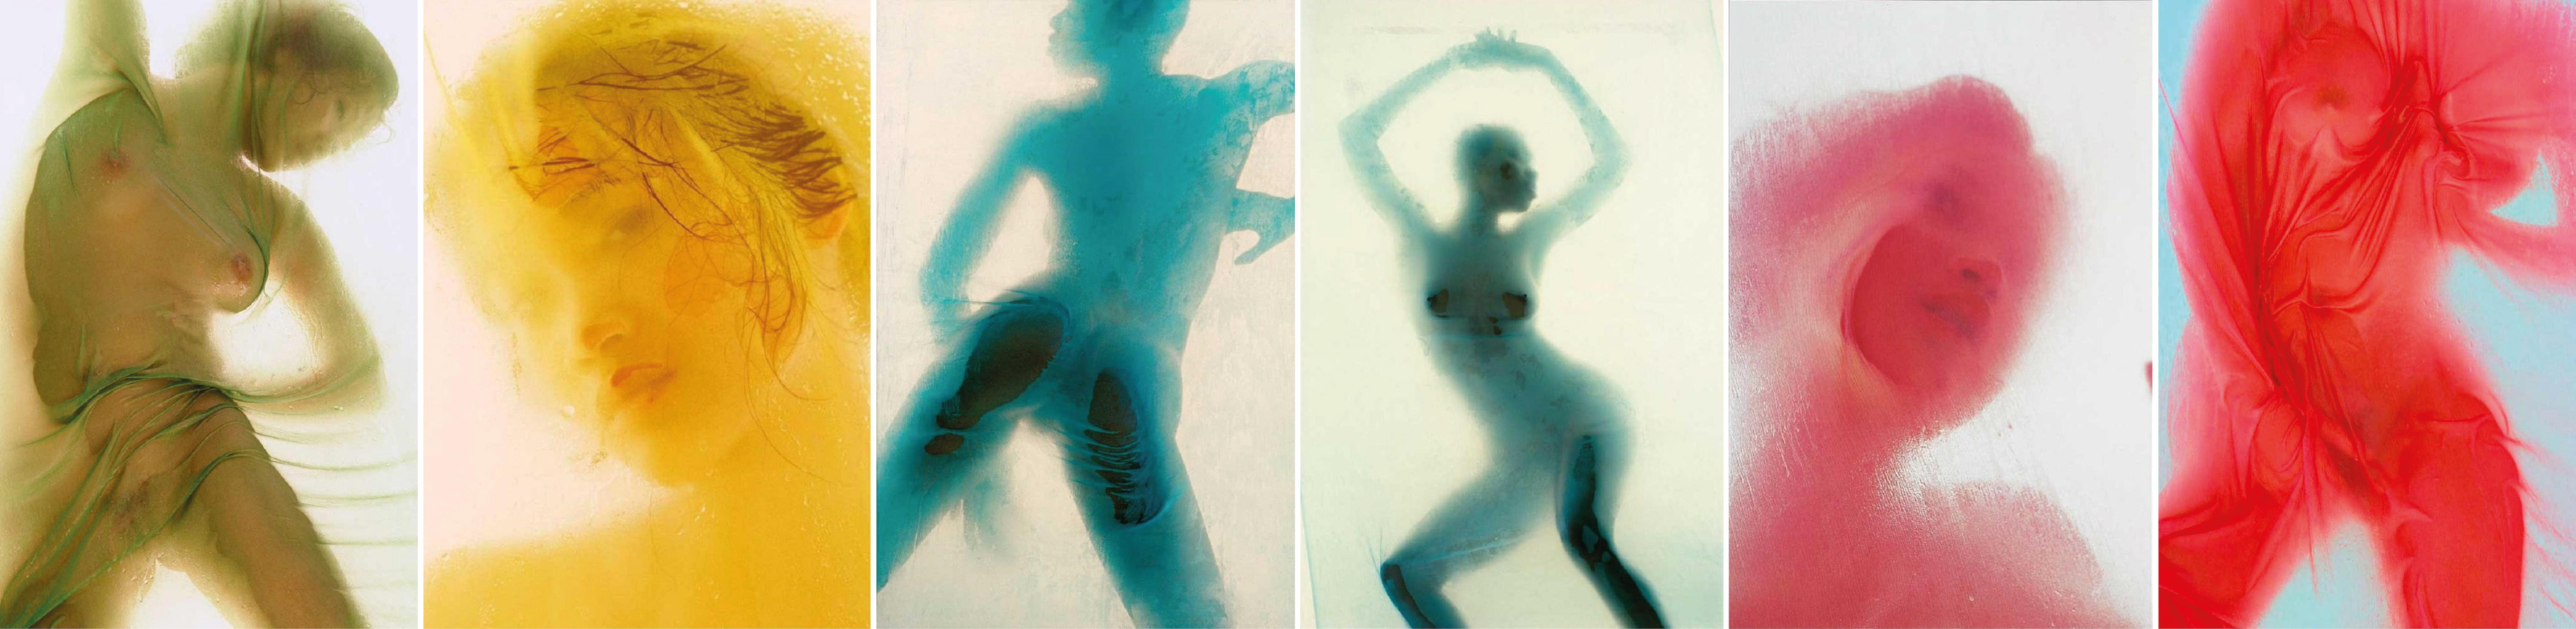 Uwe Ommer Nude Photograph - Polyptych I, from the series Les Voiles. LImited Edition Color Photograph